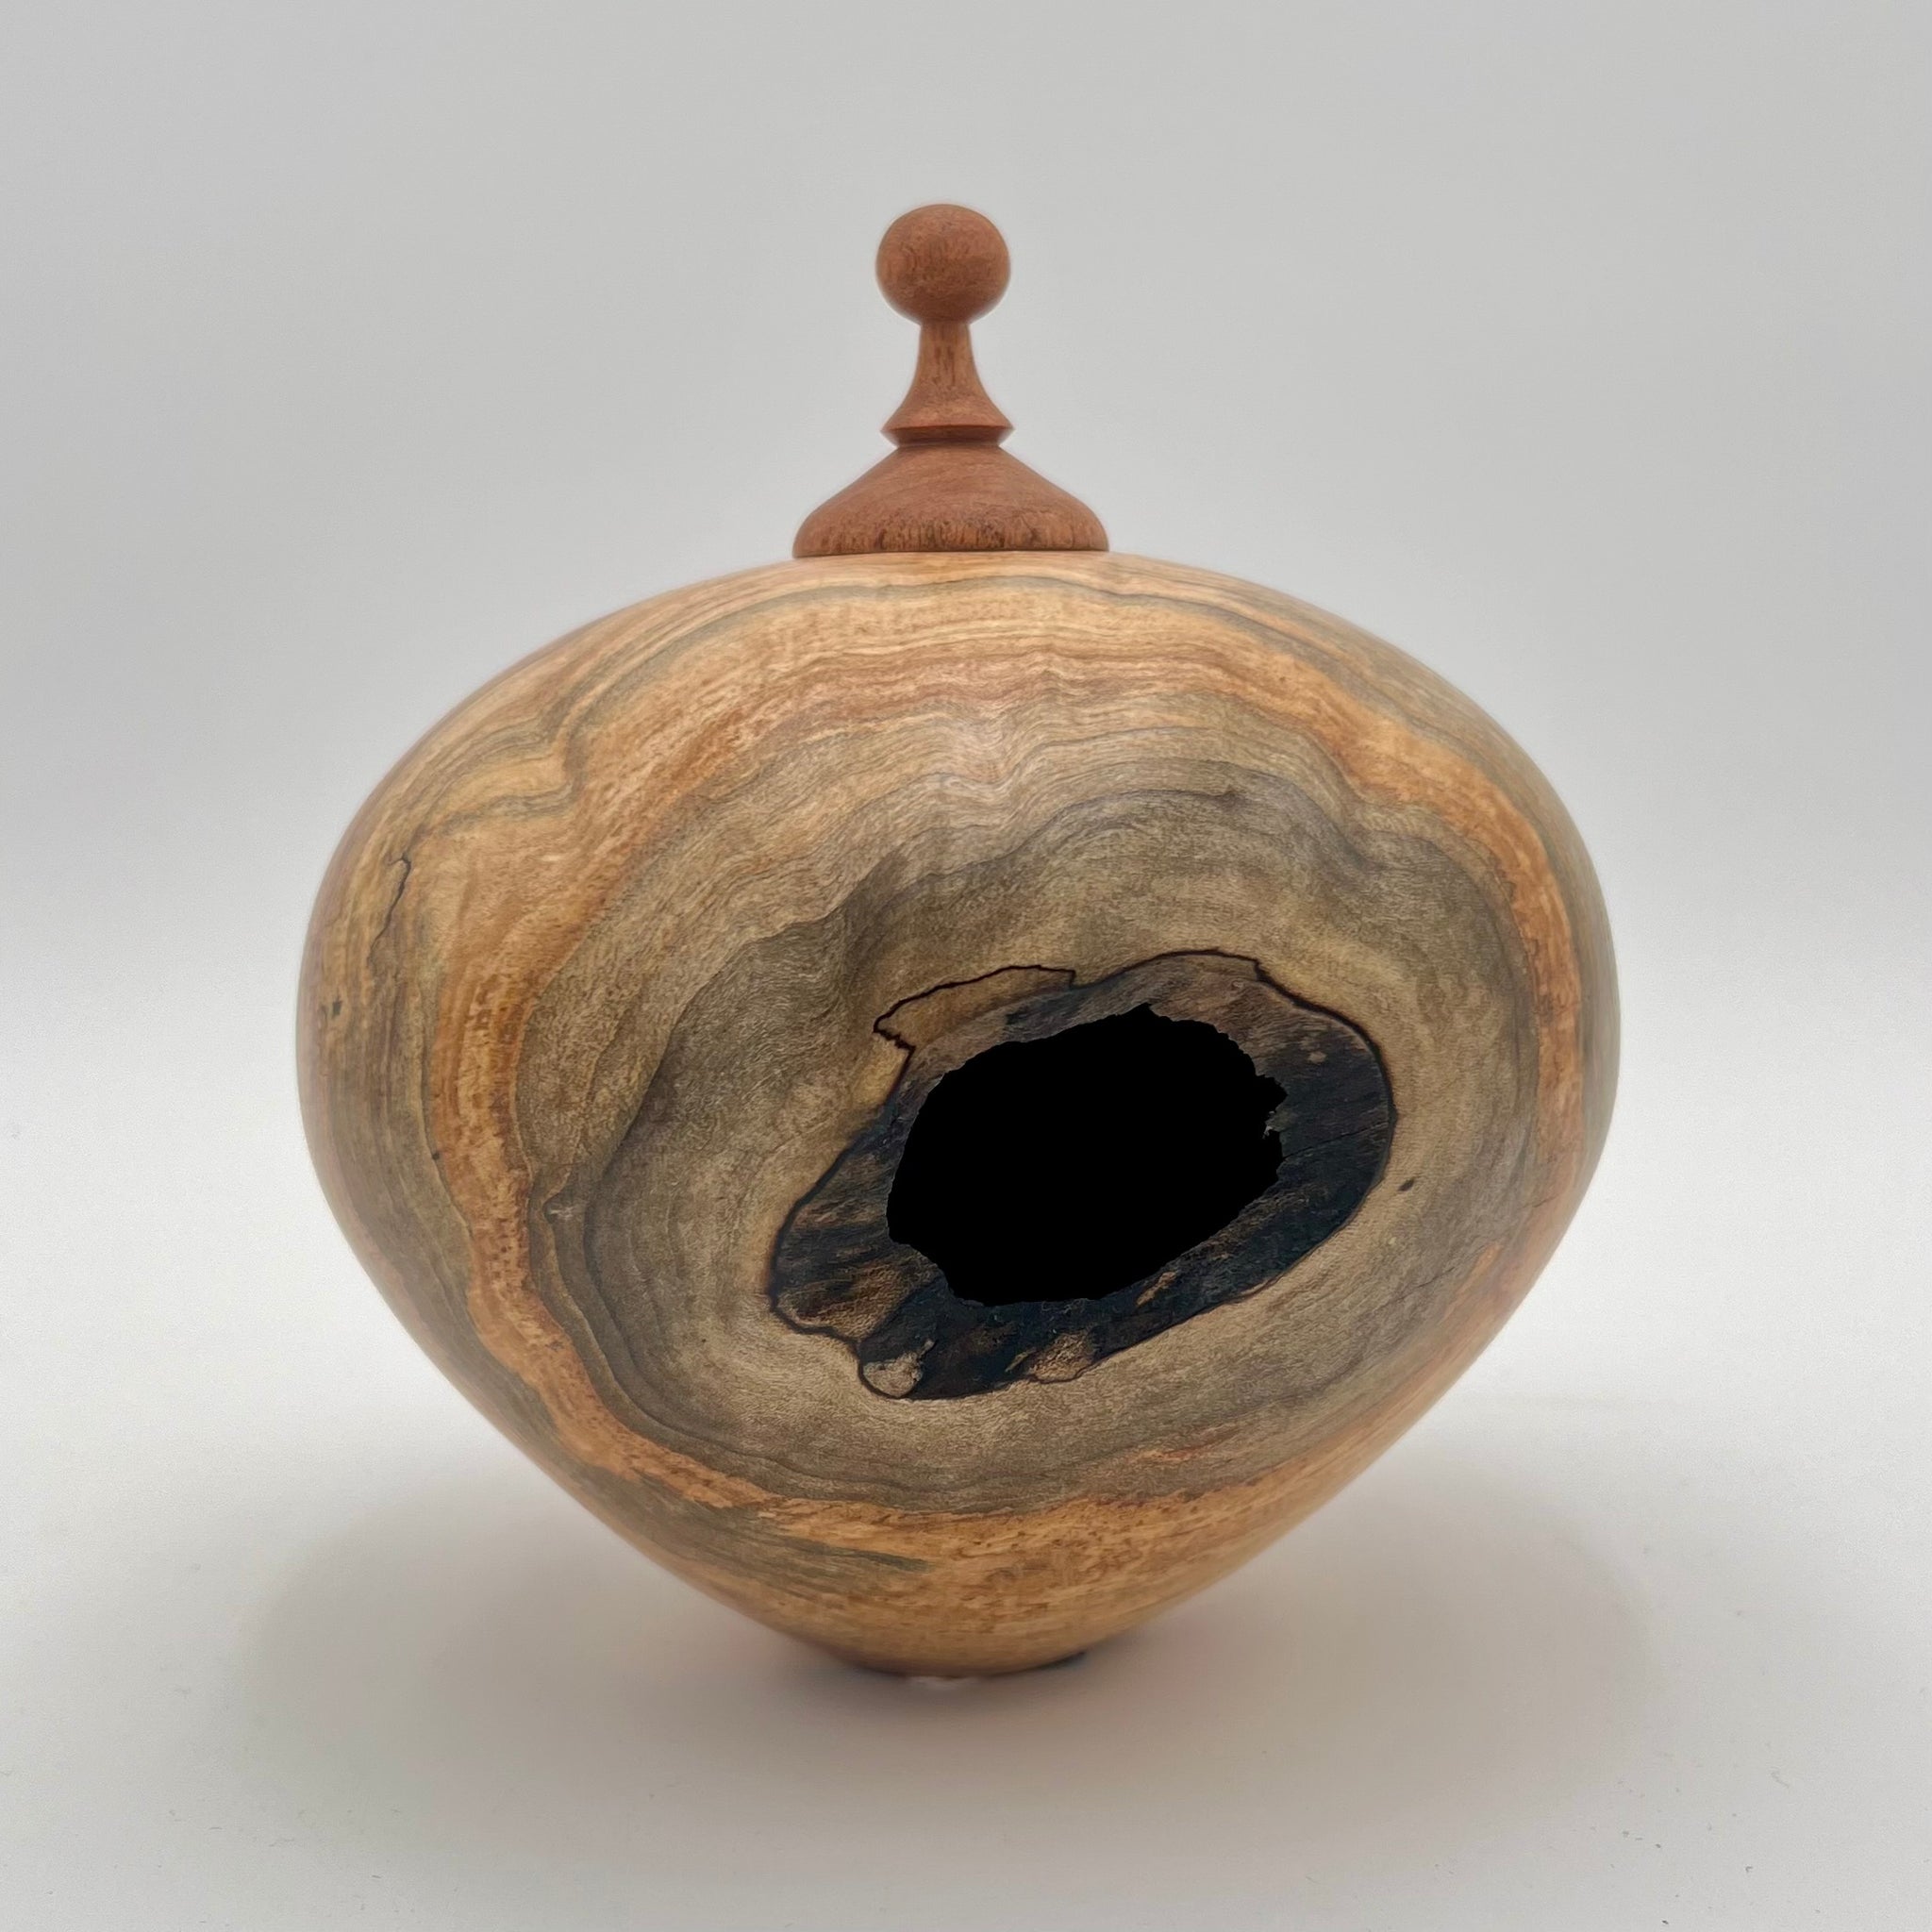 Meyer Wood Studio - Carved Wooden Urn - Hollow Form with Mesquite Cap (Spalted Maple, Mesquite) #90-23